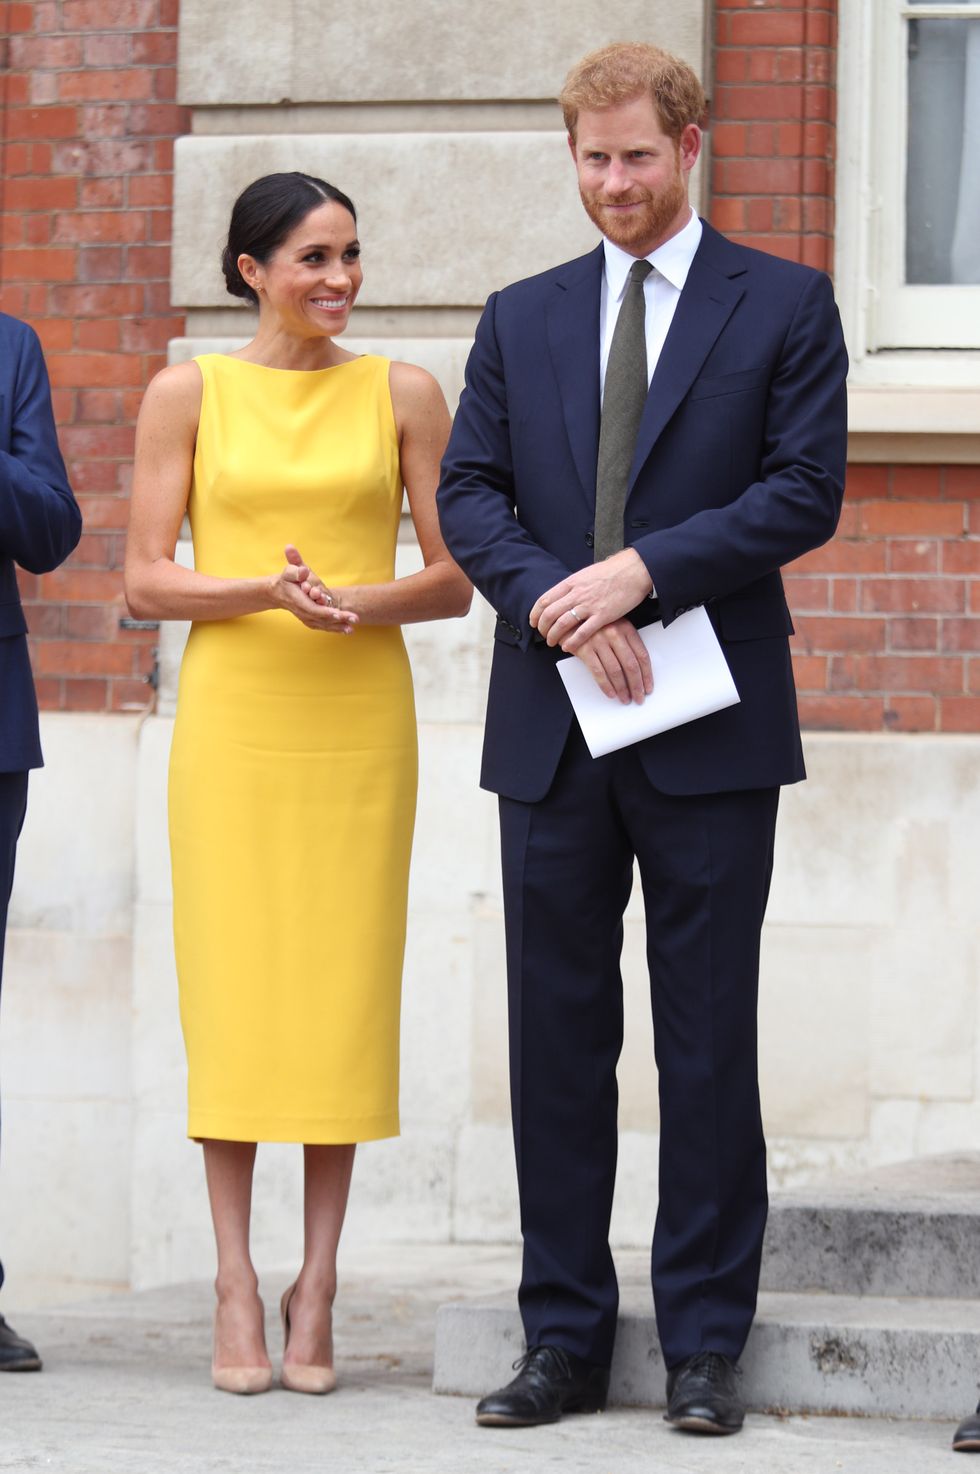 london, england   july 05 prince harry, duke of sussex and meghan, duchess of sussex attend the your commonwealth youth challenge reception at marlborough house on july 05, 2018 in london, england photo by yui mok   wpa poolgetty images